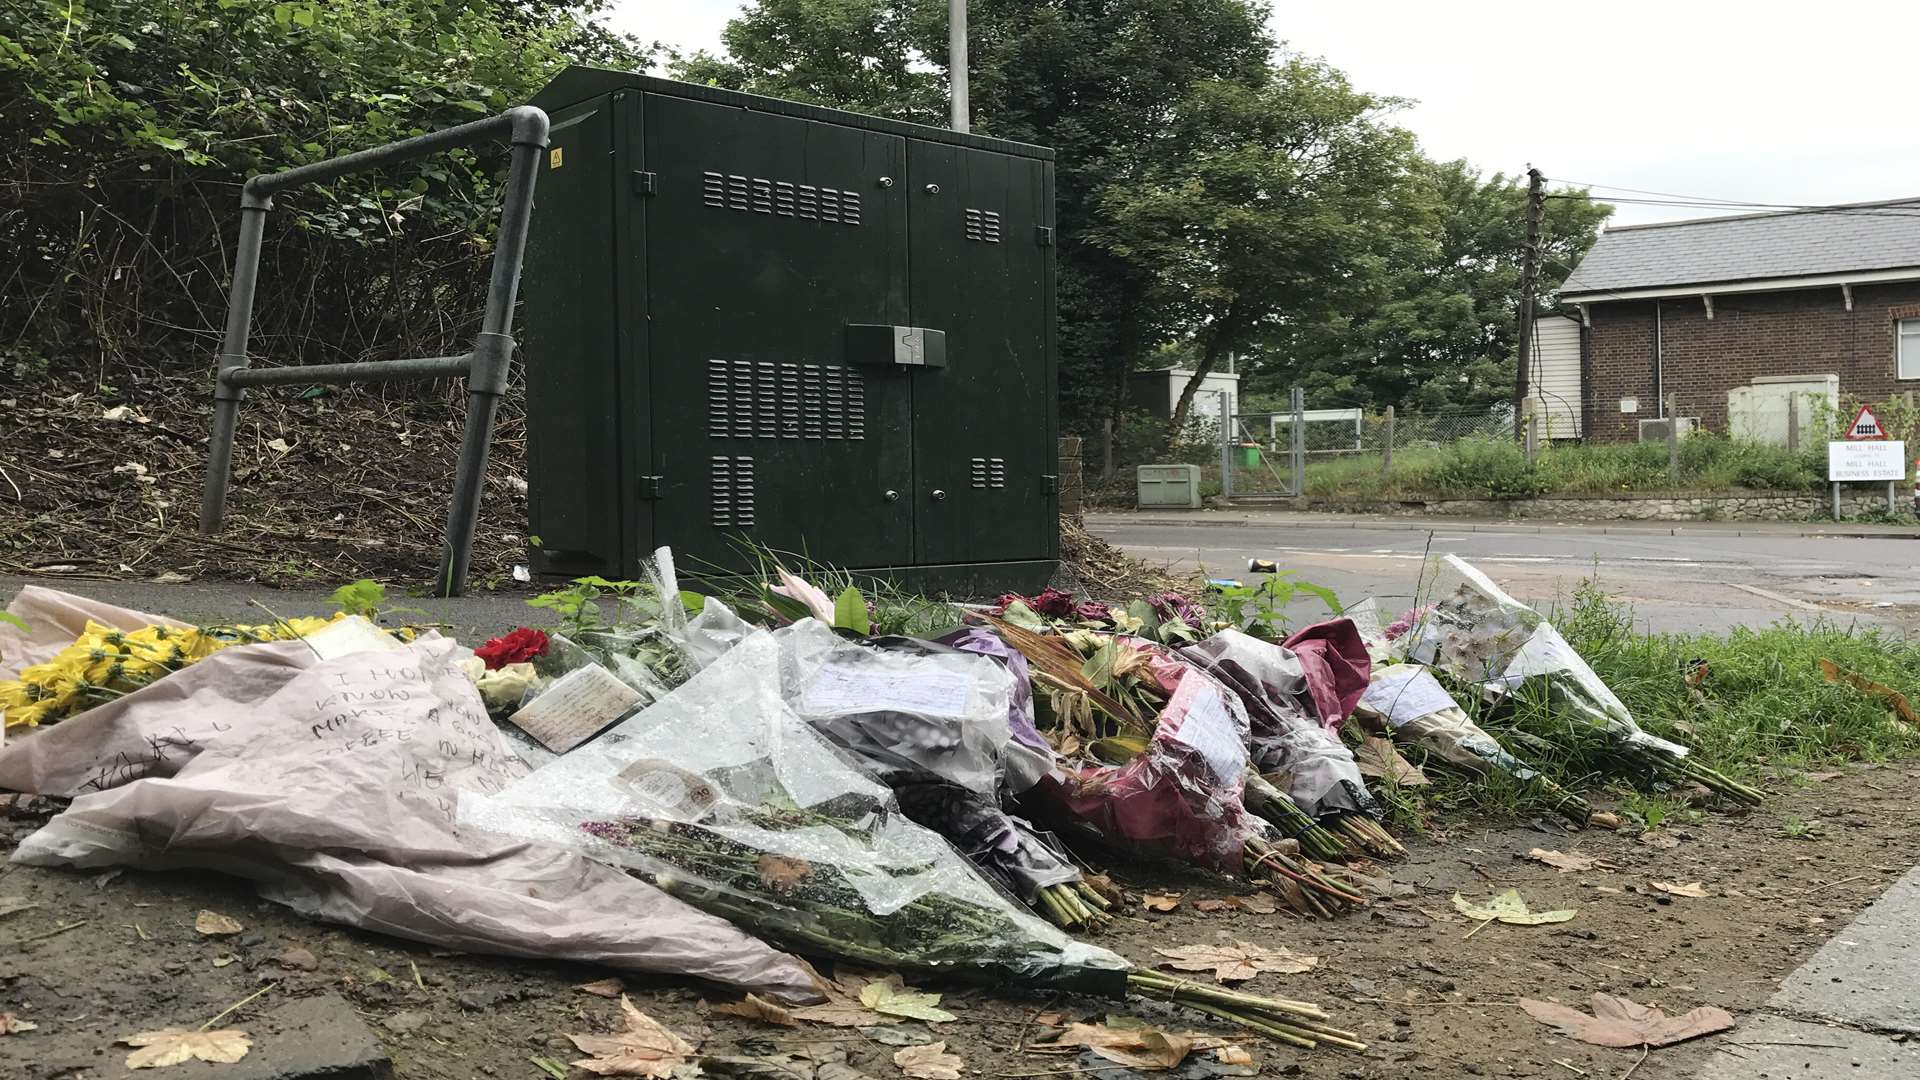 Flowers have been laid where Derek Gane was found collapsed